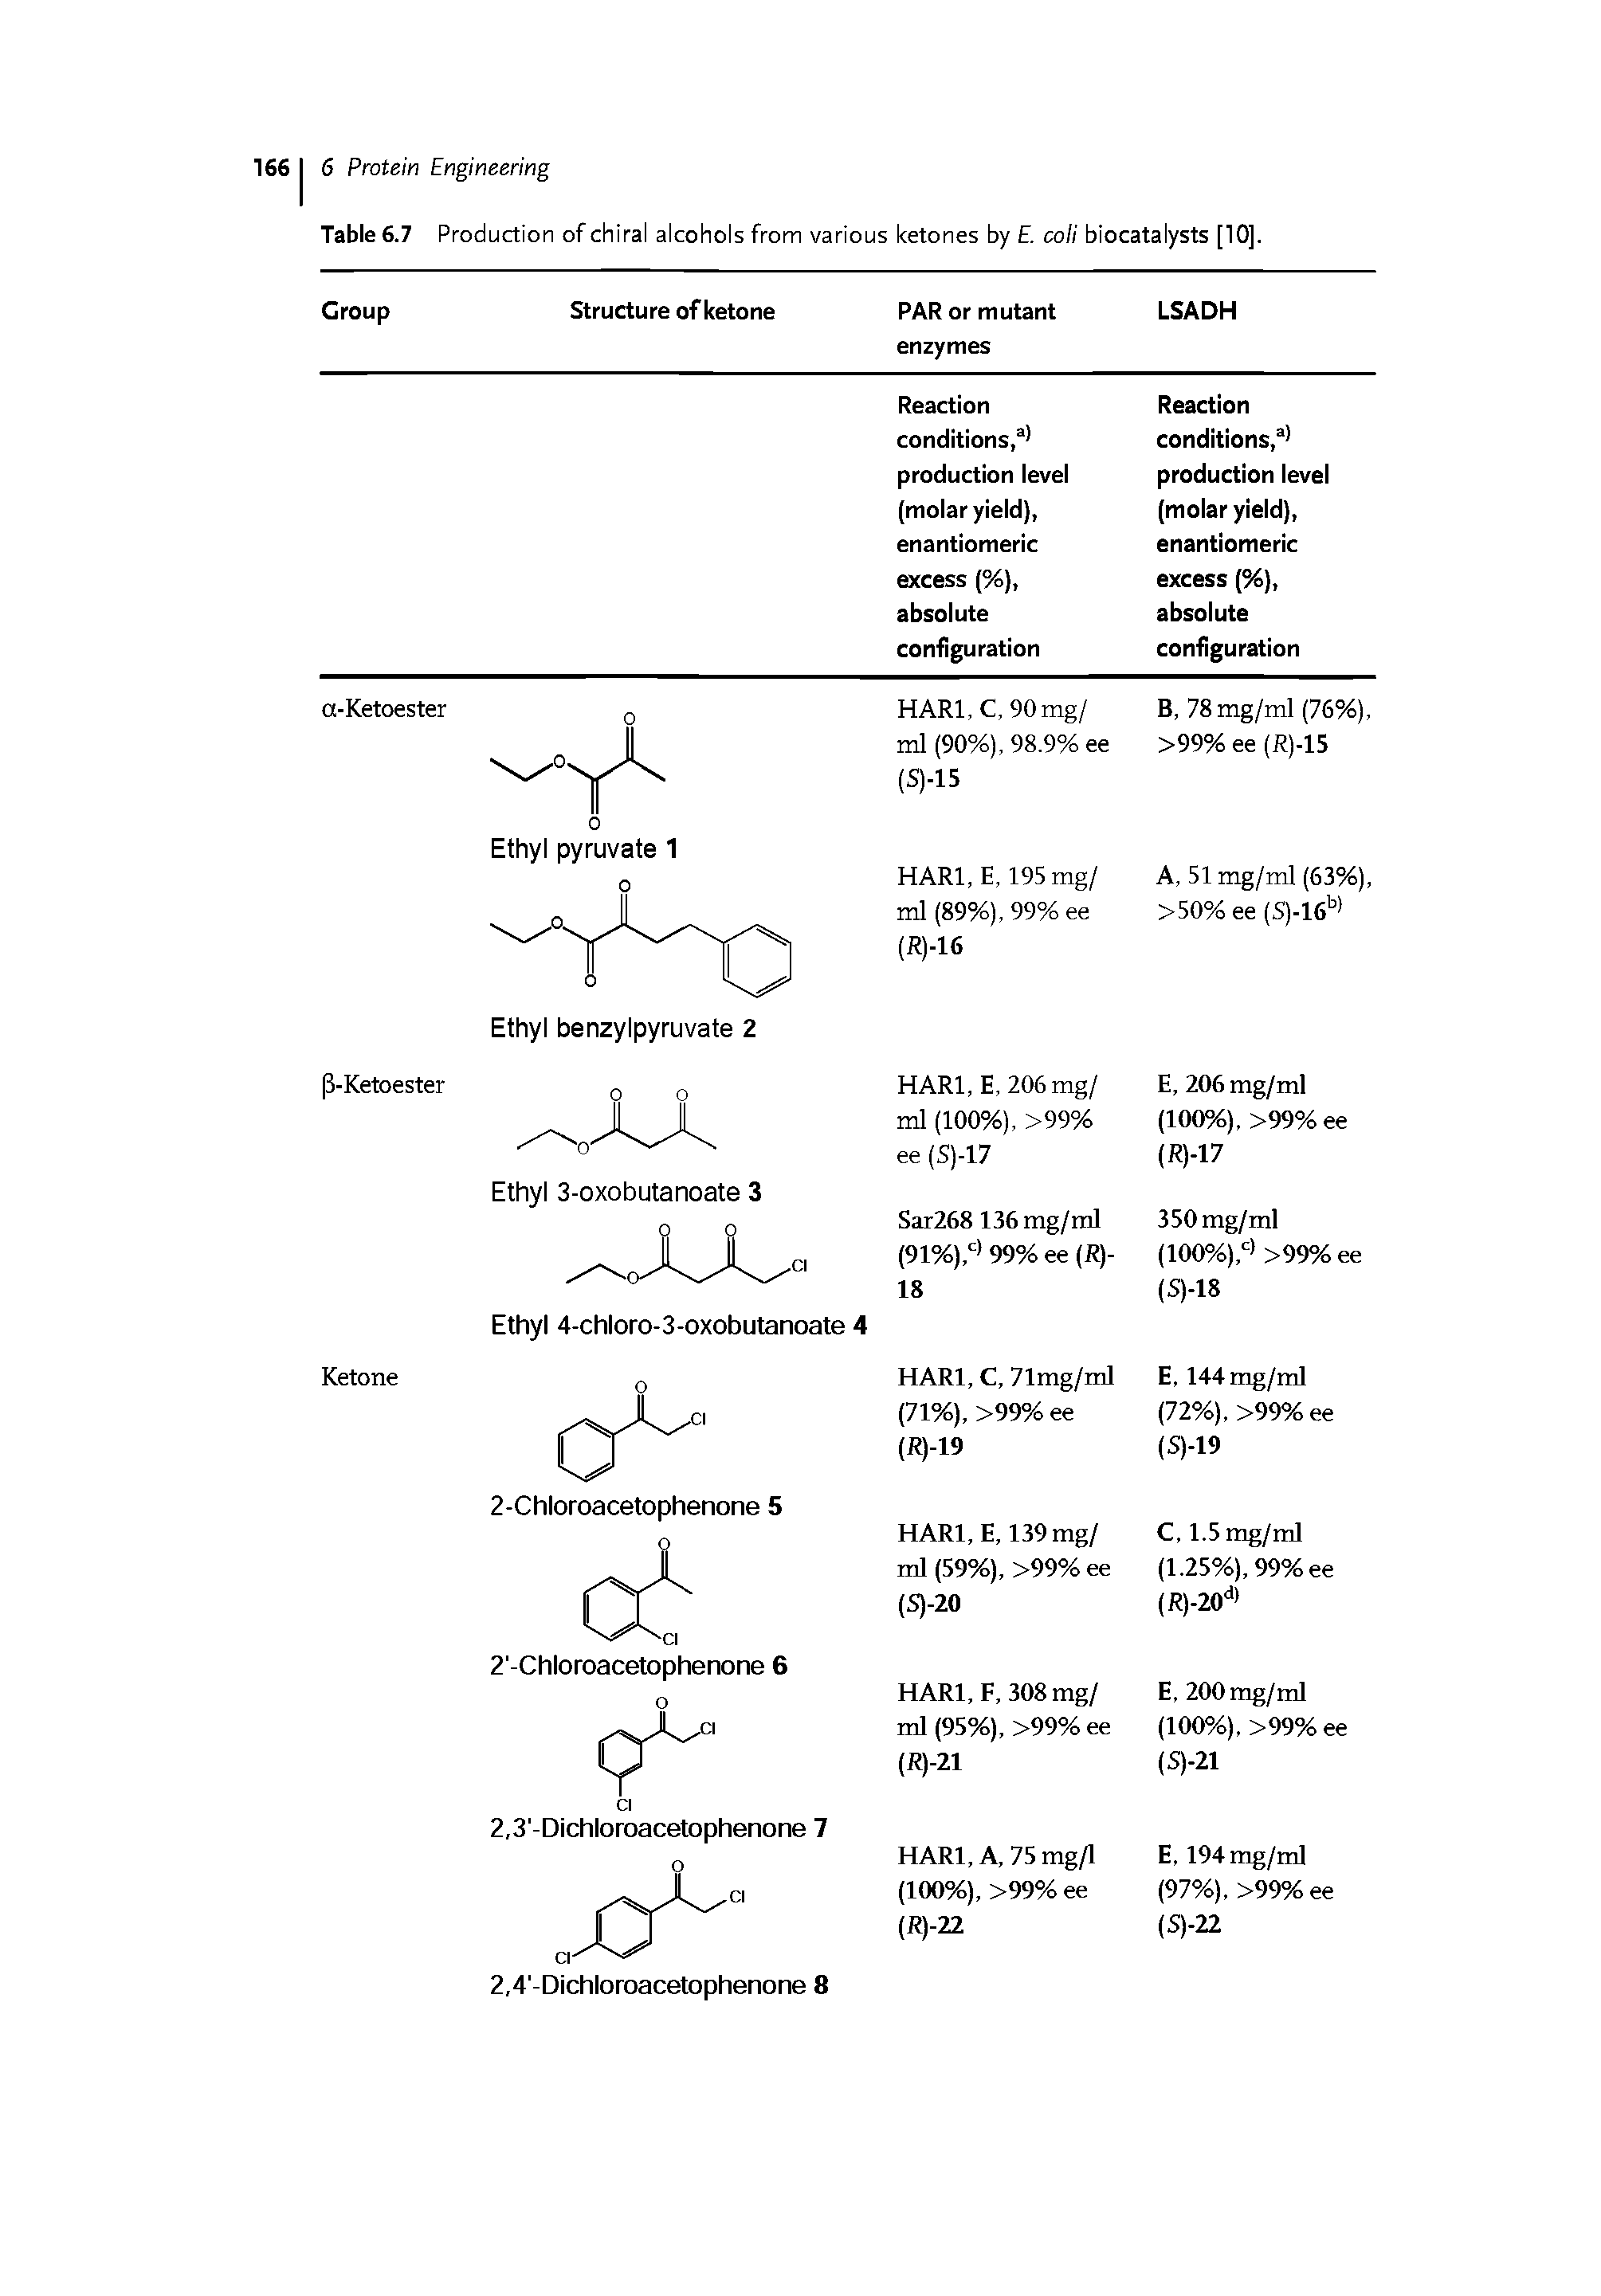 Table 6.7 Production of chiral alcohols from various ketones by coli biocatalysts [10].